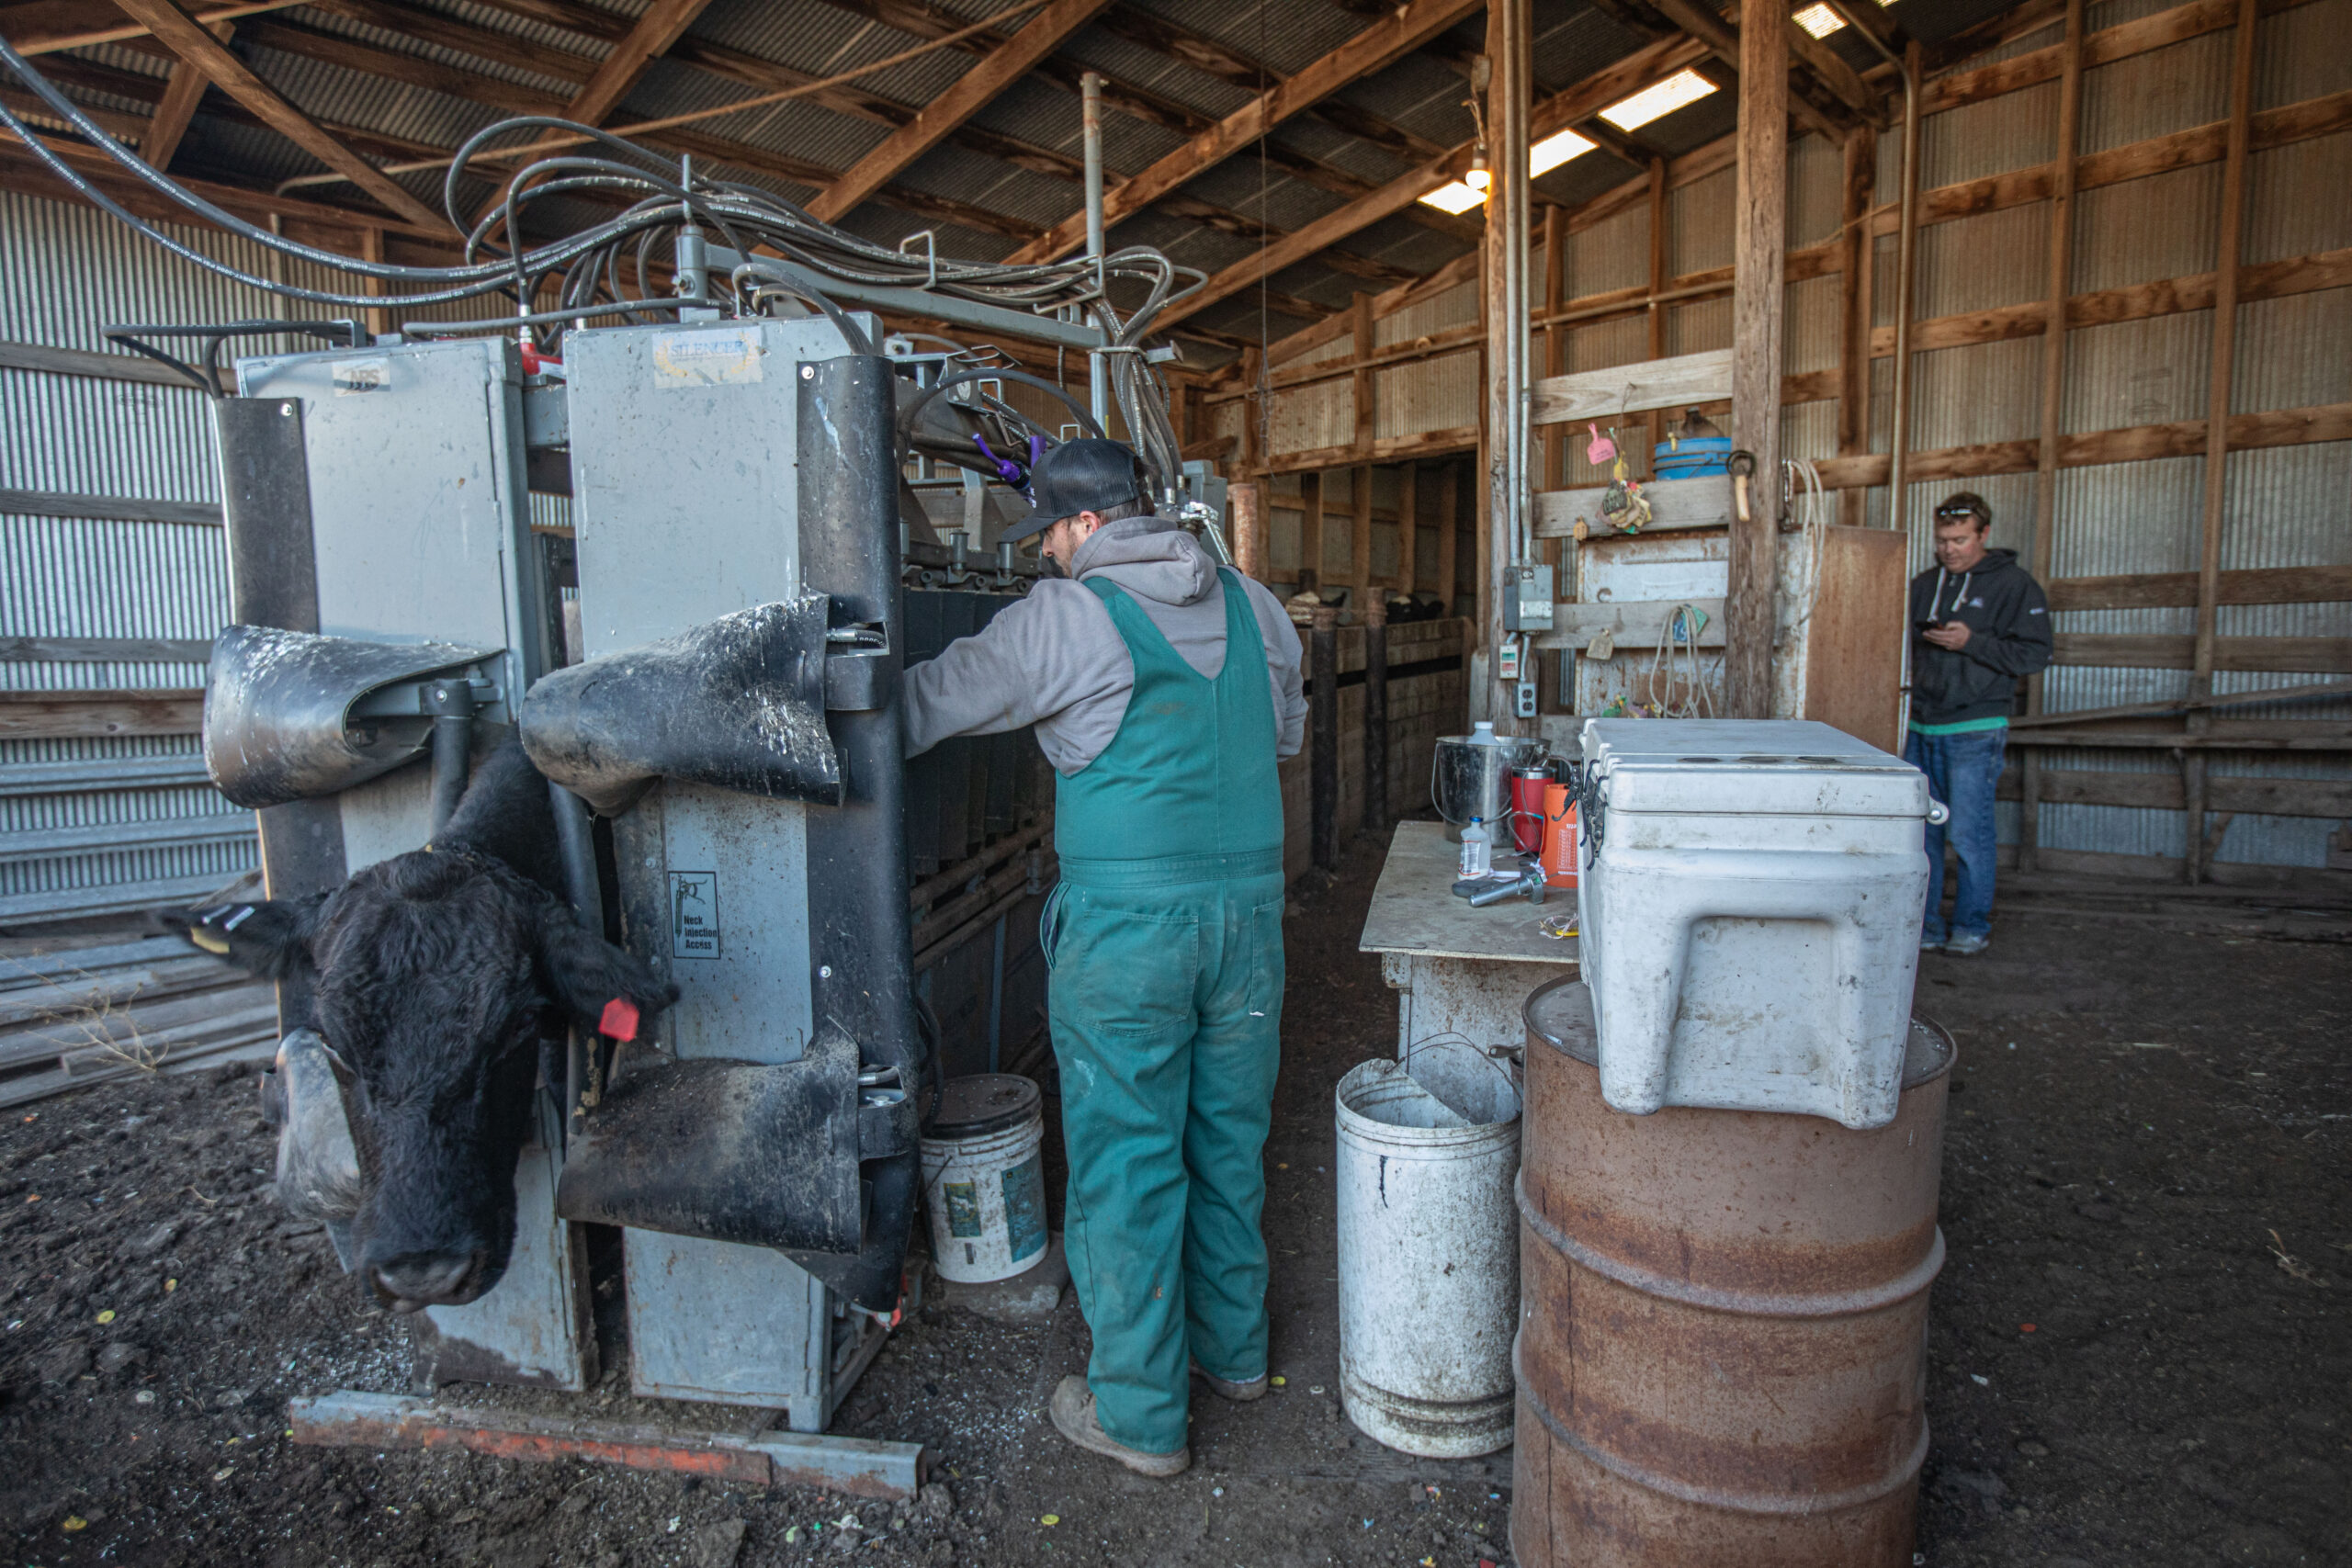 In a wooden barn, a man near a hydraulic chute machine tending to cattle, while another man observes. Implements and tools are scattered around.